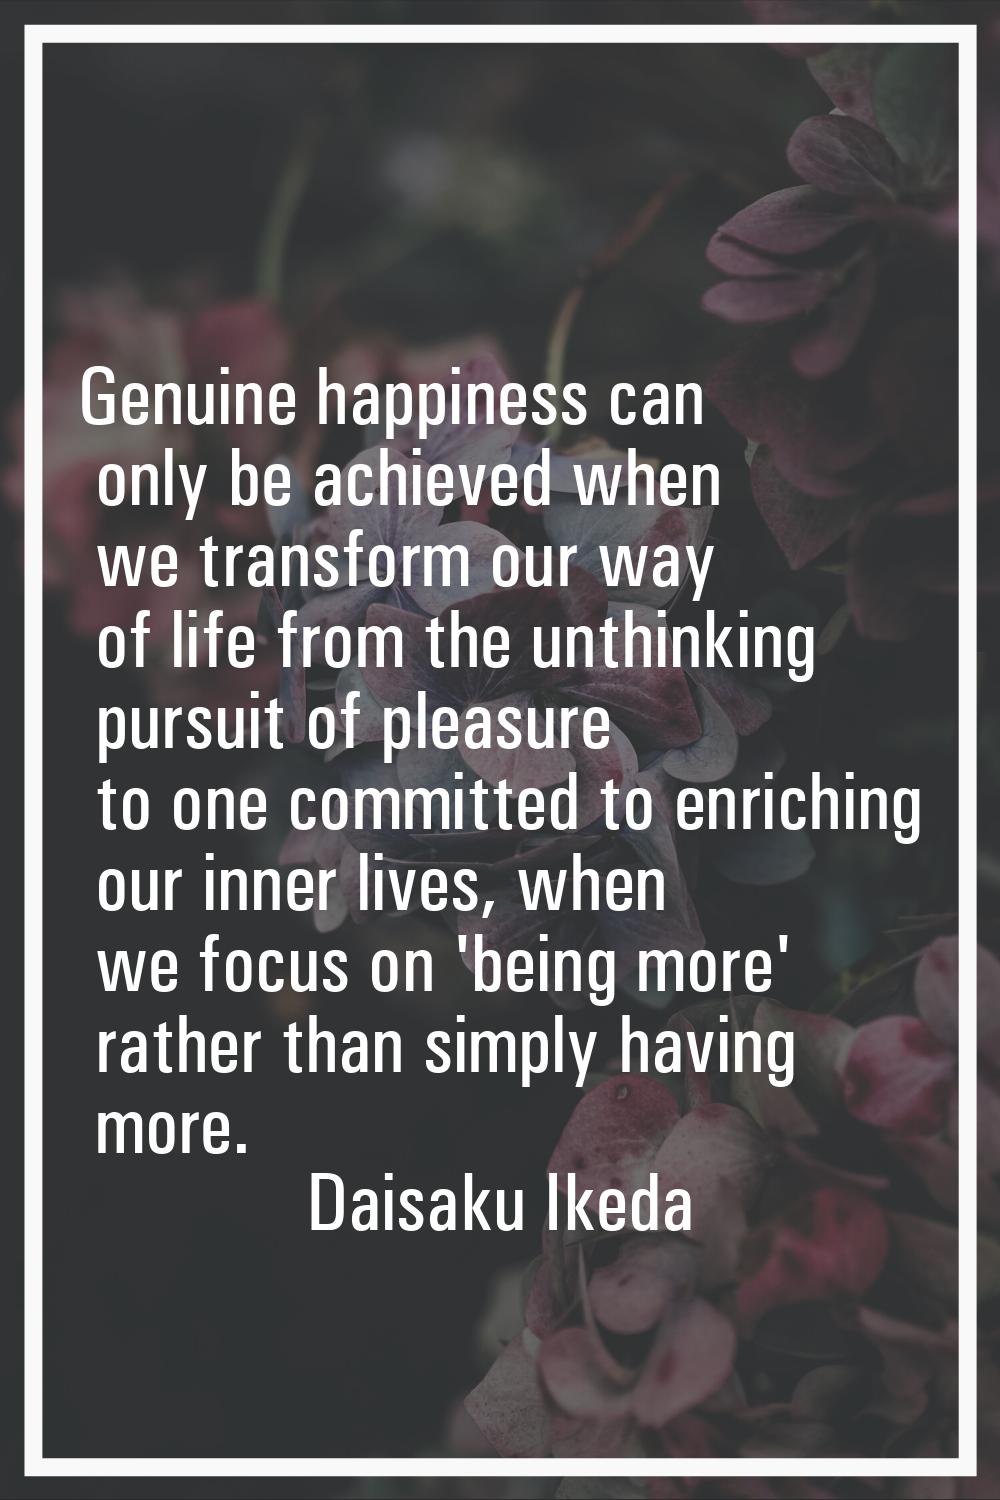 Genuine happiness can only be achieved when we transform our way of life from the unthinking pursui